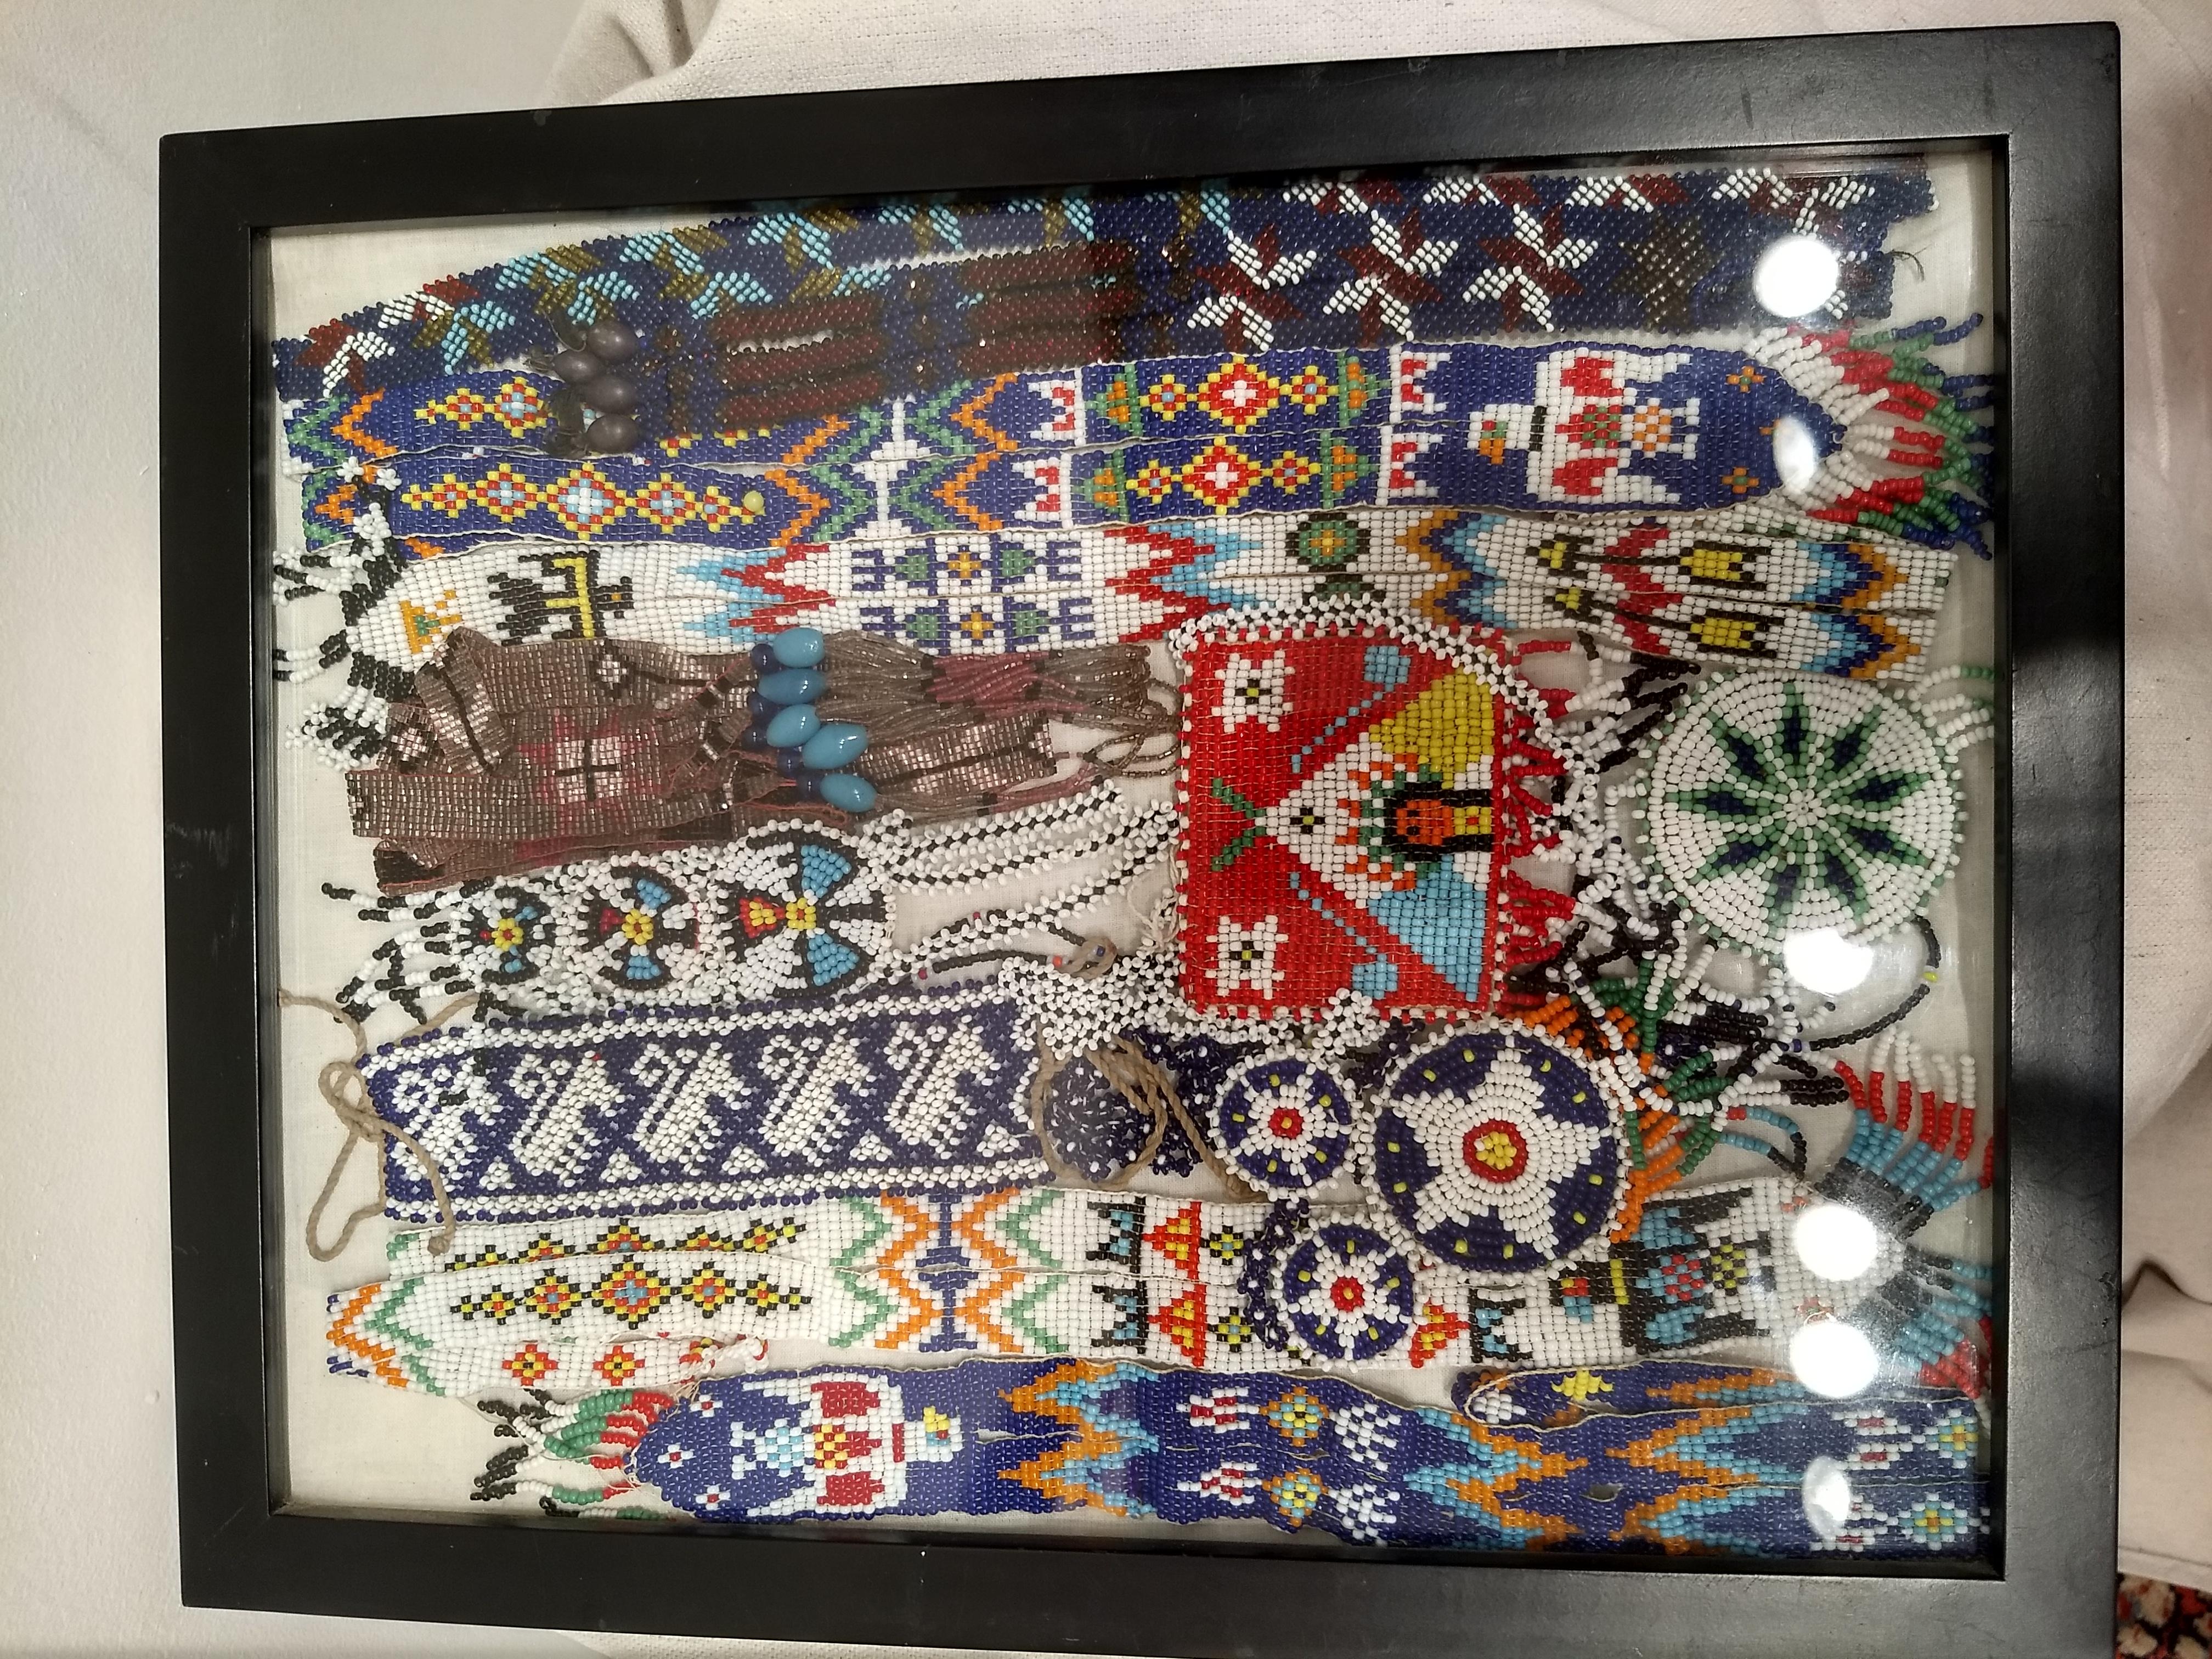   Native American Navajo Beadwork Necklace Collection Displayed in a Shadow Box 3